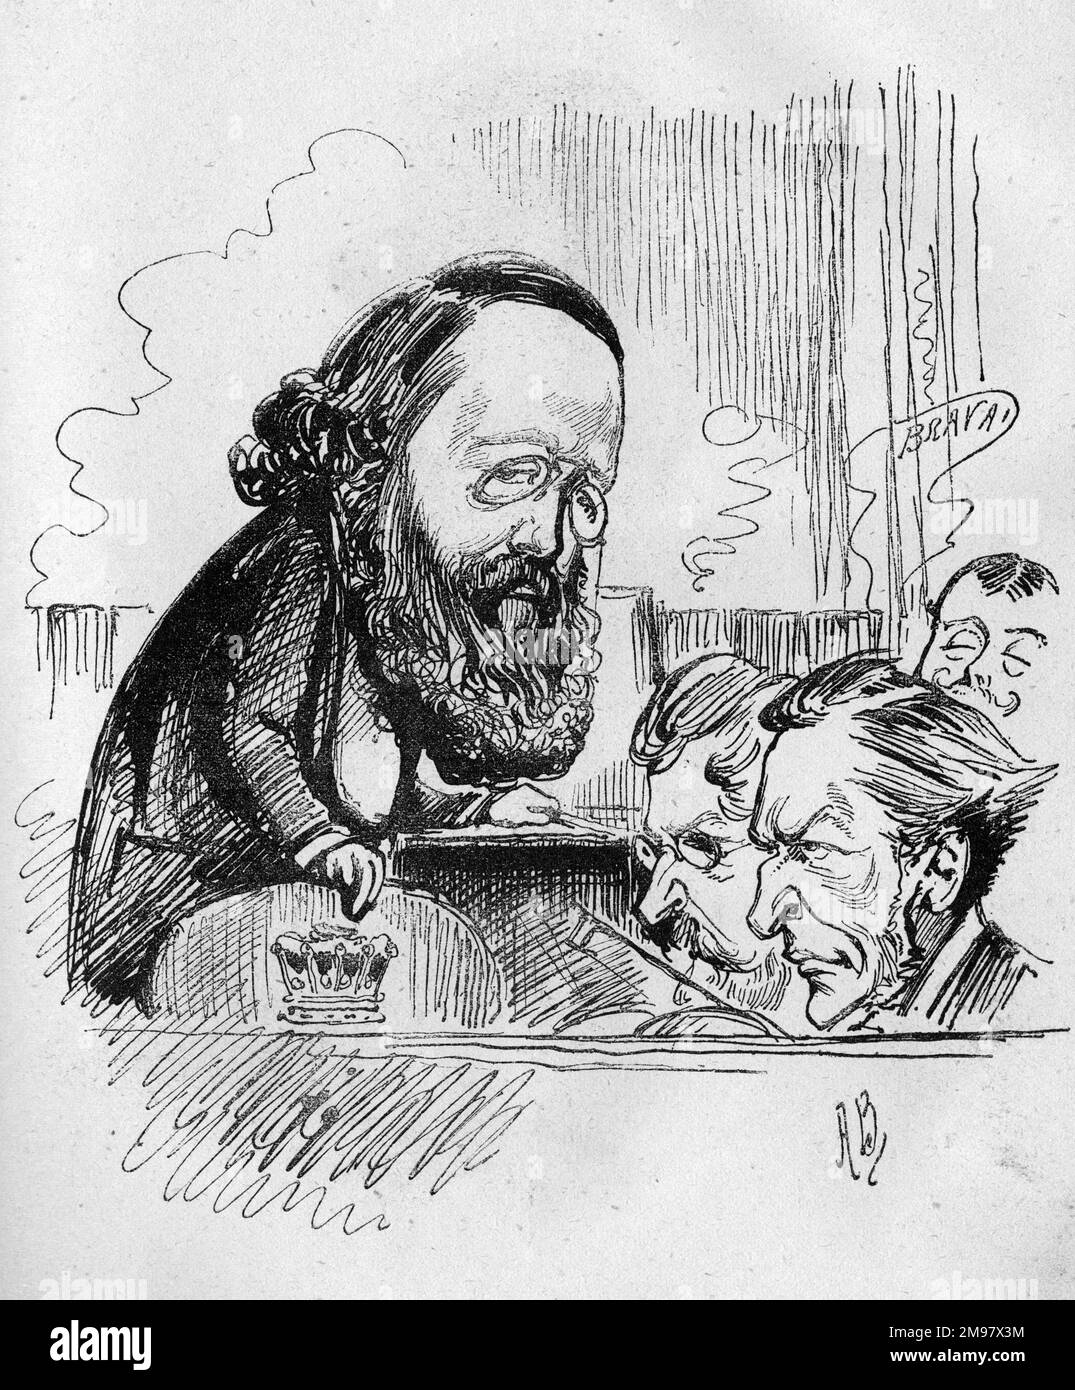 Cartoon of Lord Salisbury (Robert Arthur Talbot Gascoyne-Cecil, 3rd Marquess of Salisbury, 1830-1903), the newly appointed Conservative party leader and Leader of the Opposition following the death of Disraeli. Depicted here as an orchestral conductor with musicians in a theatre pit. Stock Photo